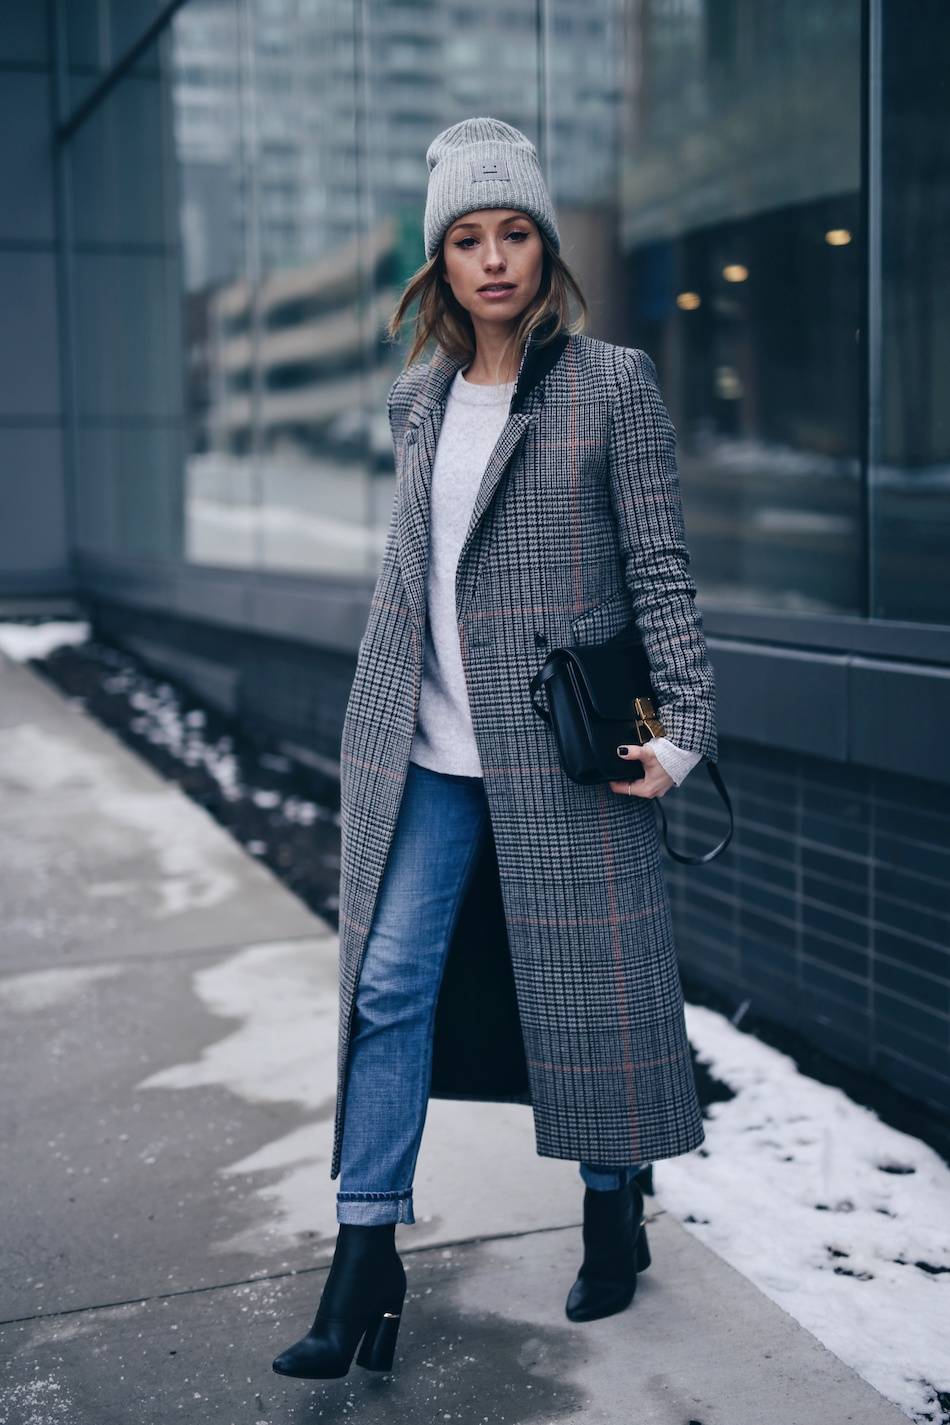 Style and beauty blogger Jill Lansky of The August Diaries on how to stay warm + stylish in the winter in Acne Pansy toque, plaid coat, Celine black box bag, 3.1 Phillip Lim boots